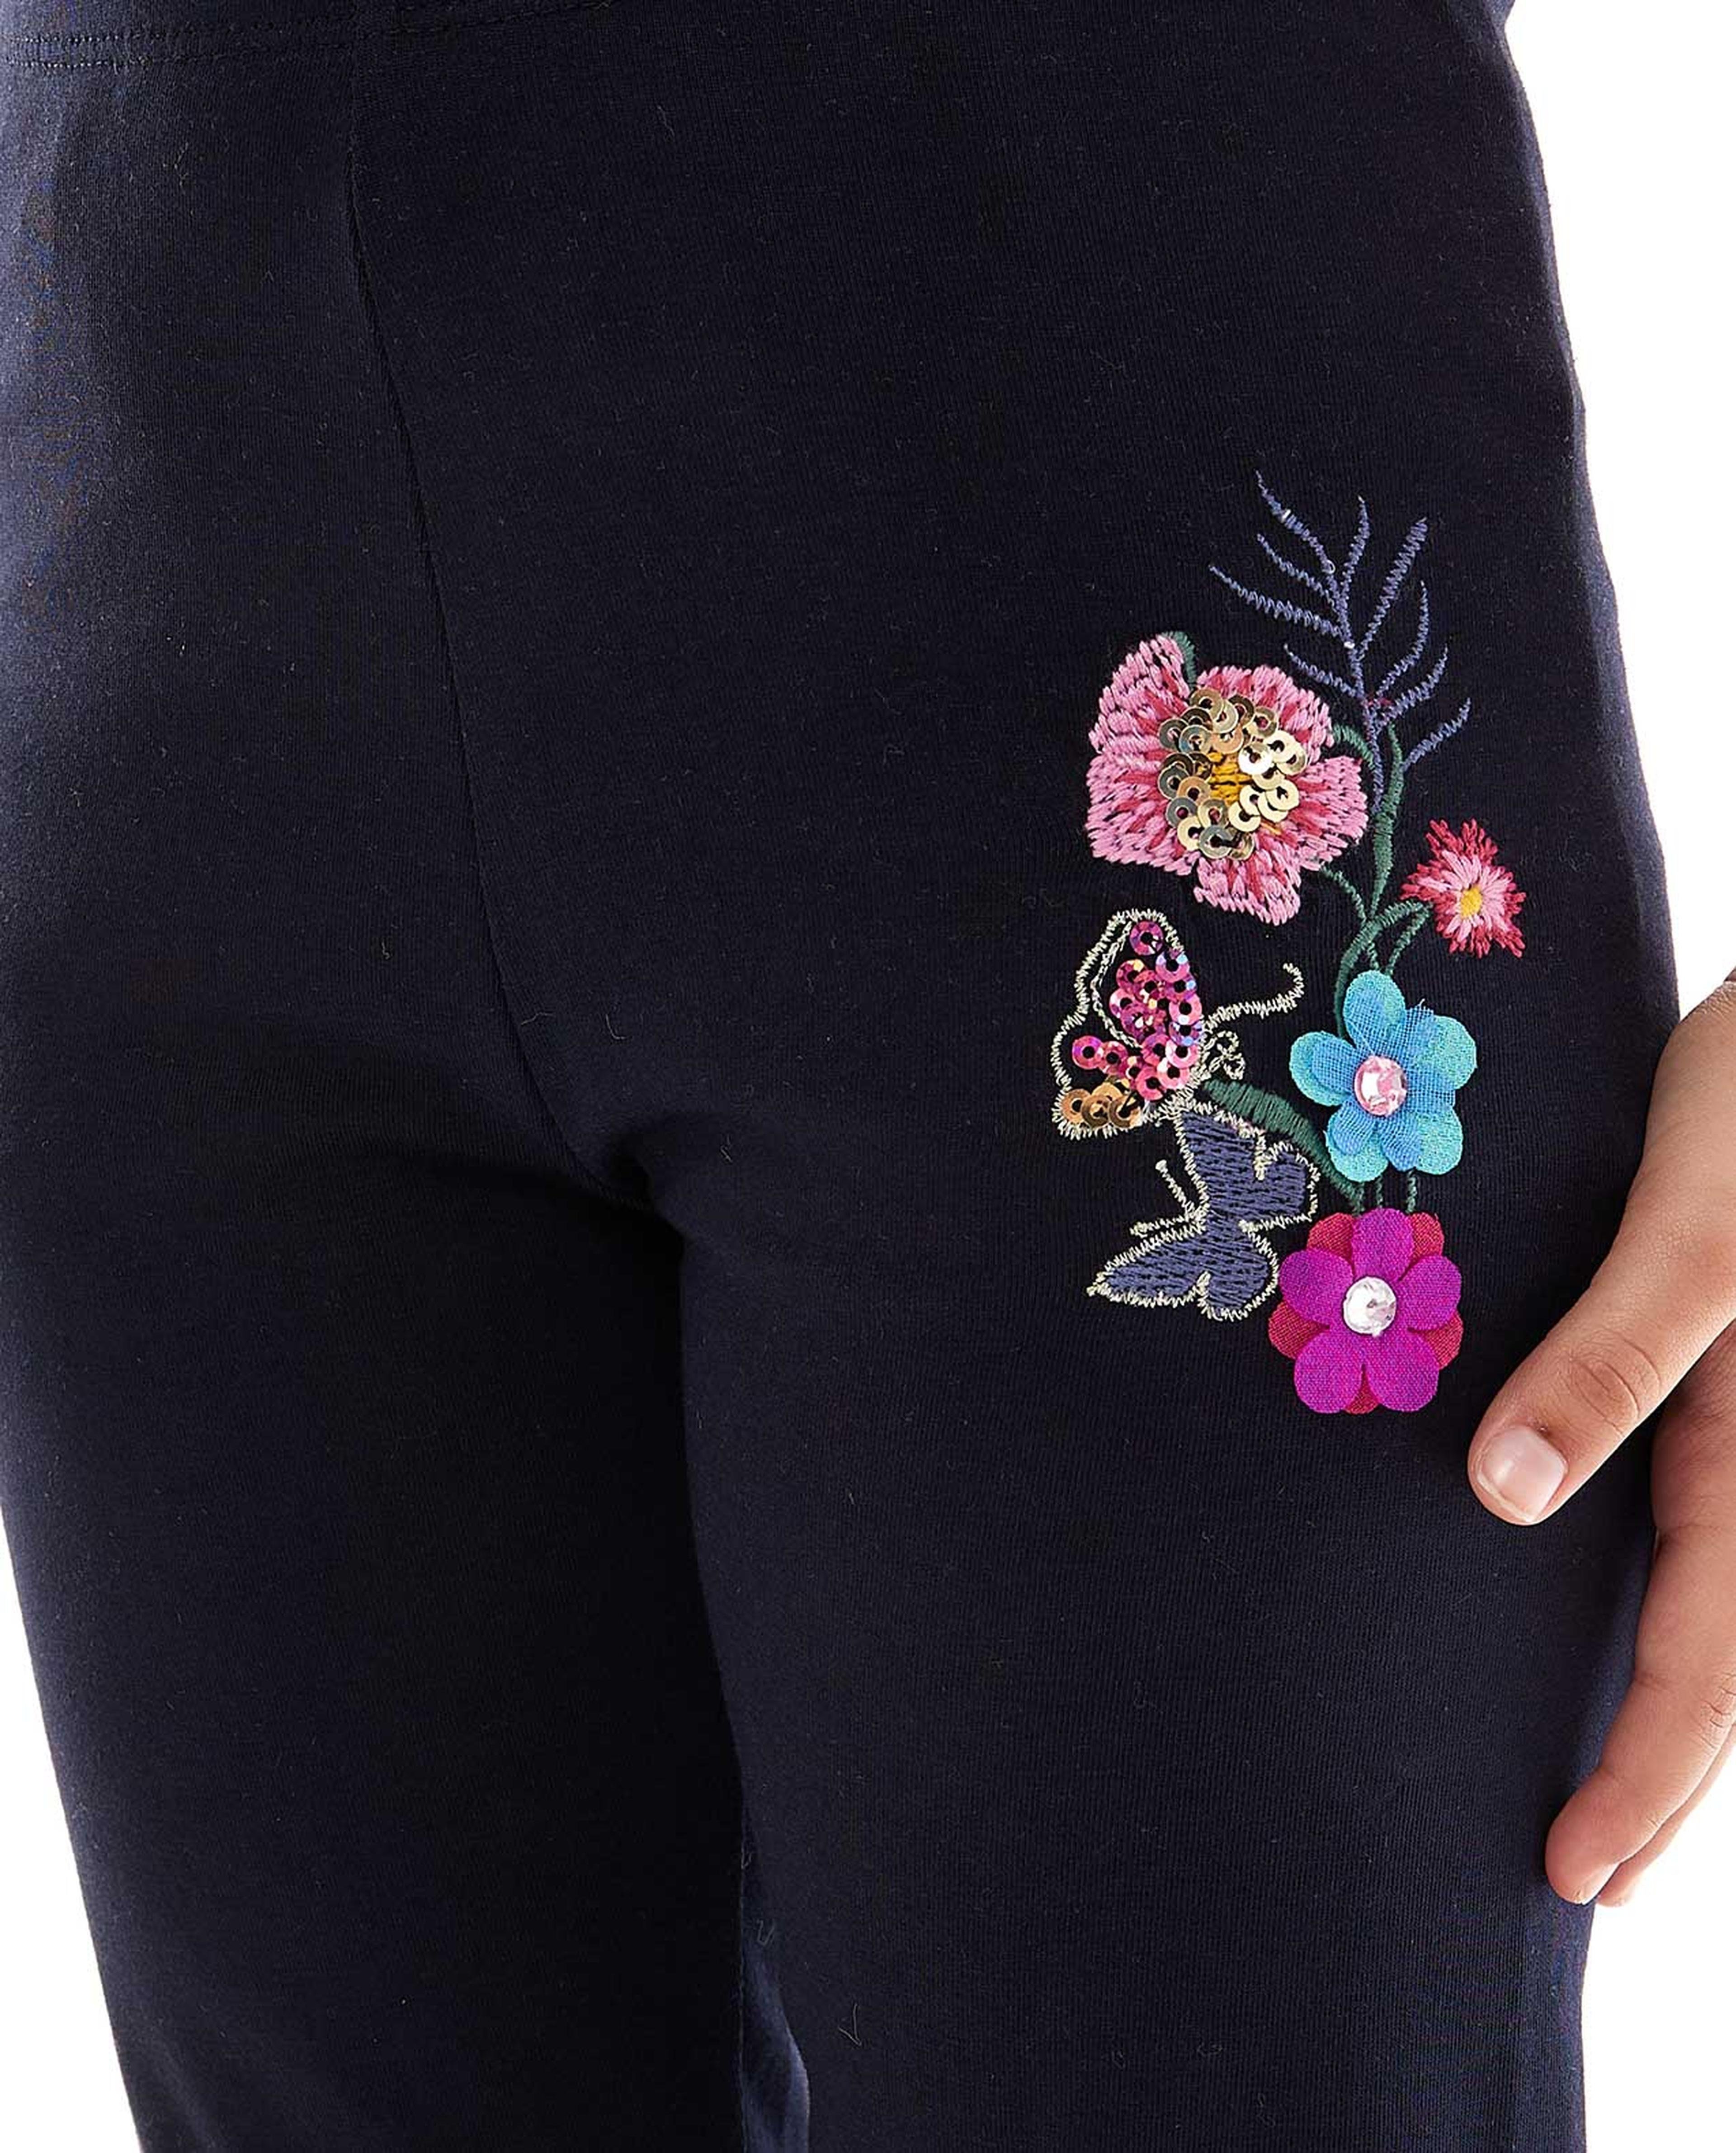 Embroidered Leggings with Elastic Waist